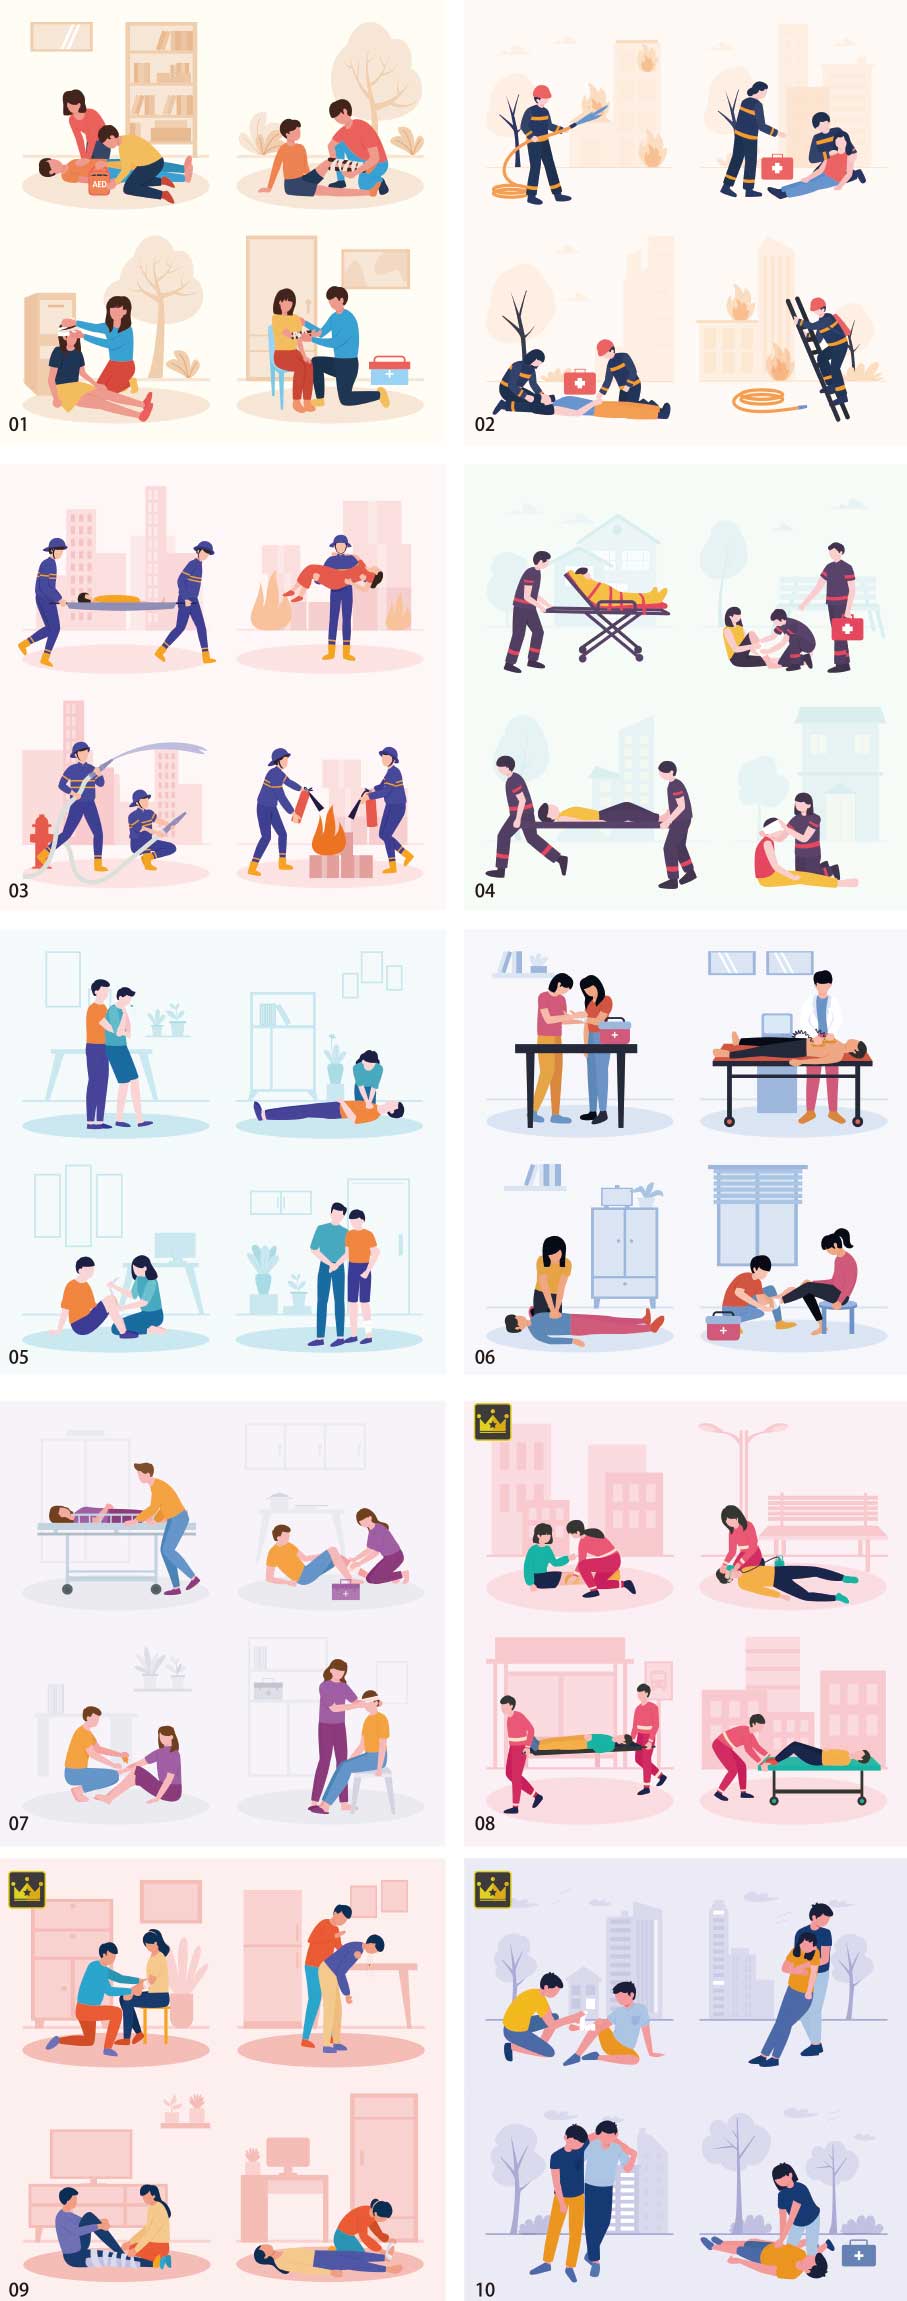 Emergency and first aid illustration collection